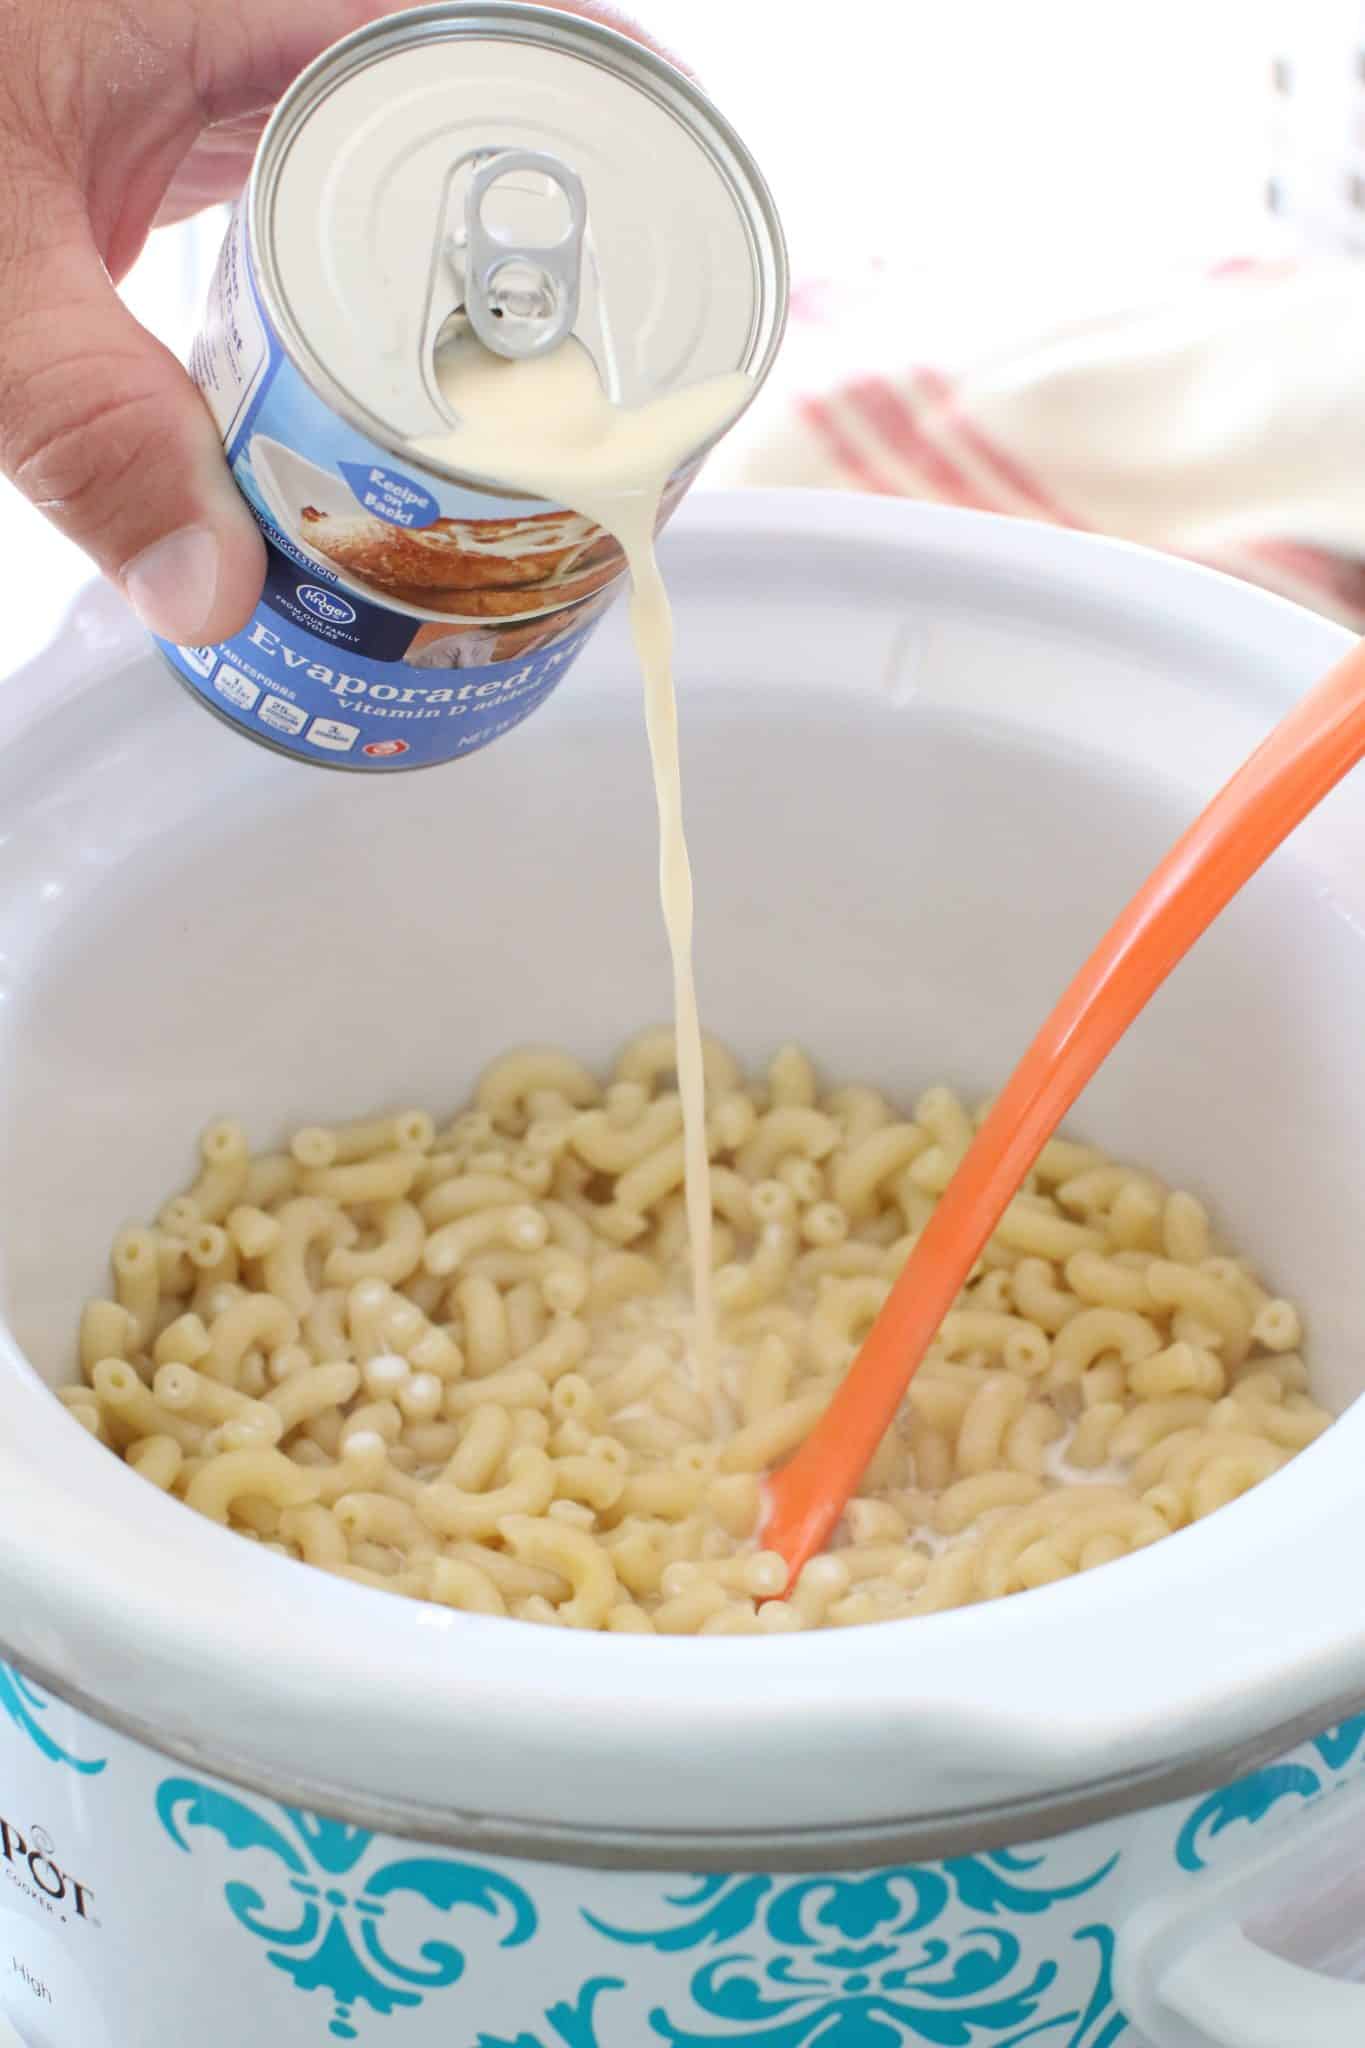 evaporated milk, half and half being poured onto the macaroni noodles in the slow cooker.